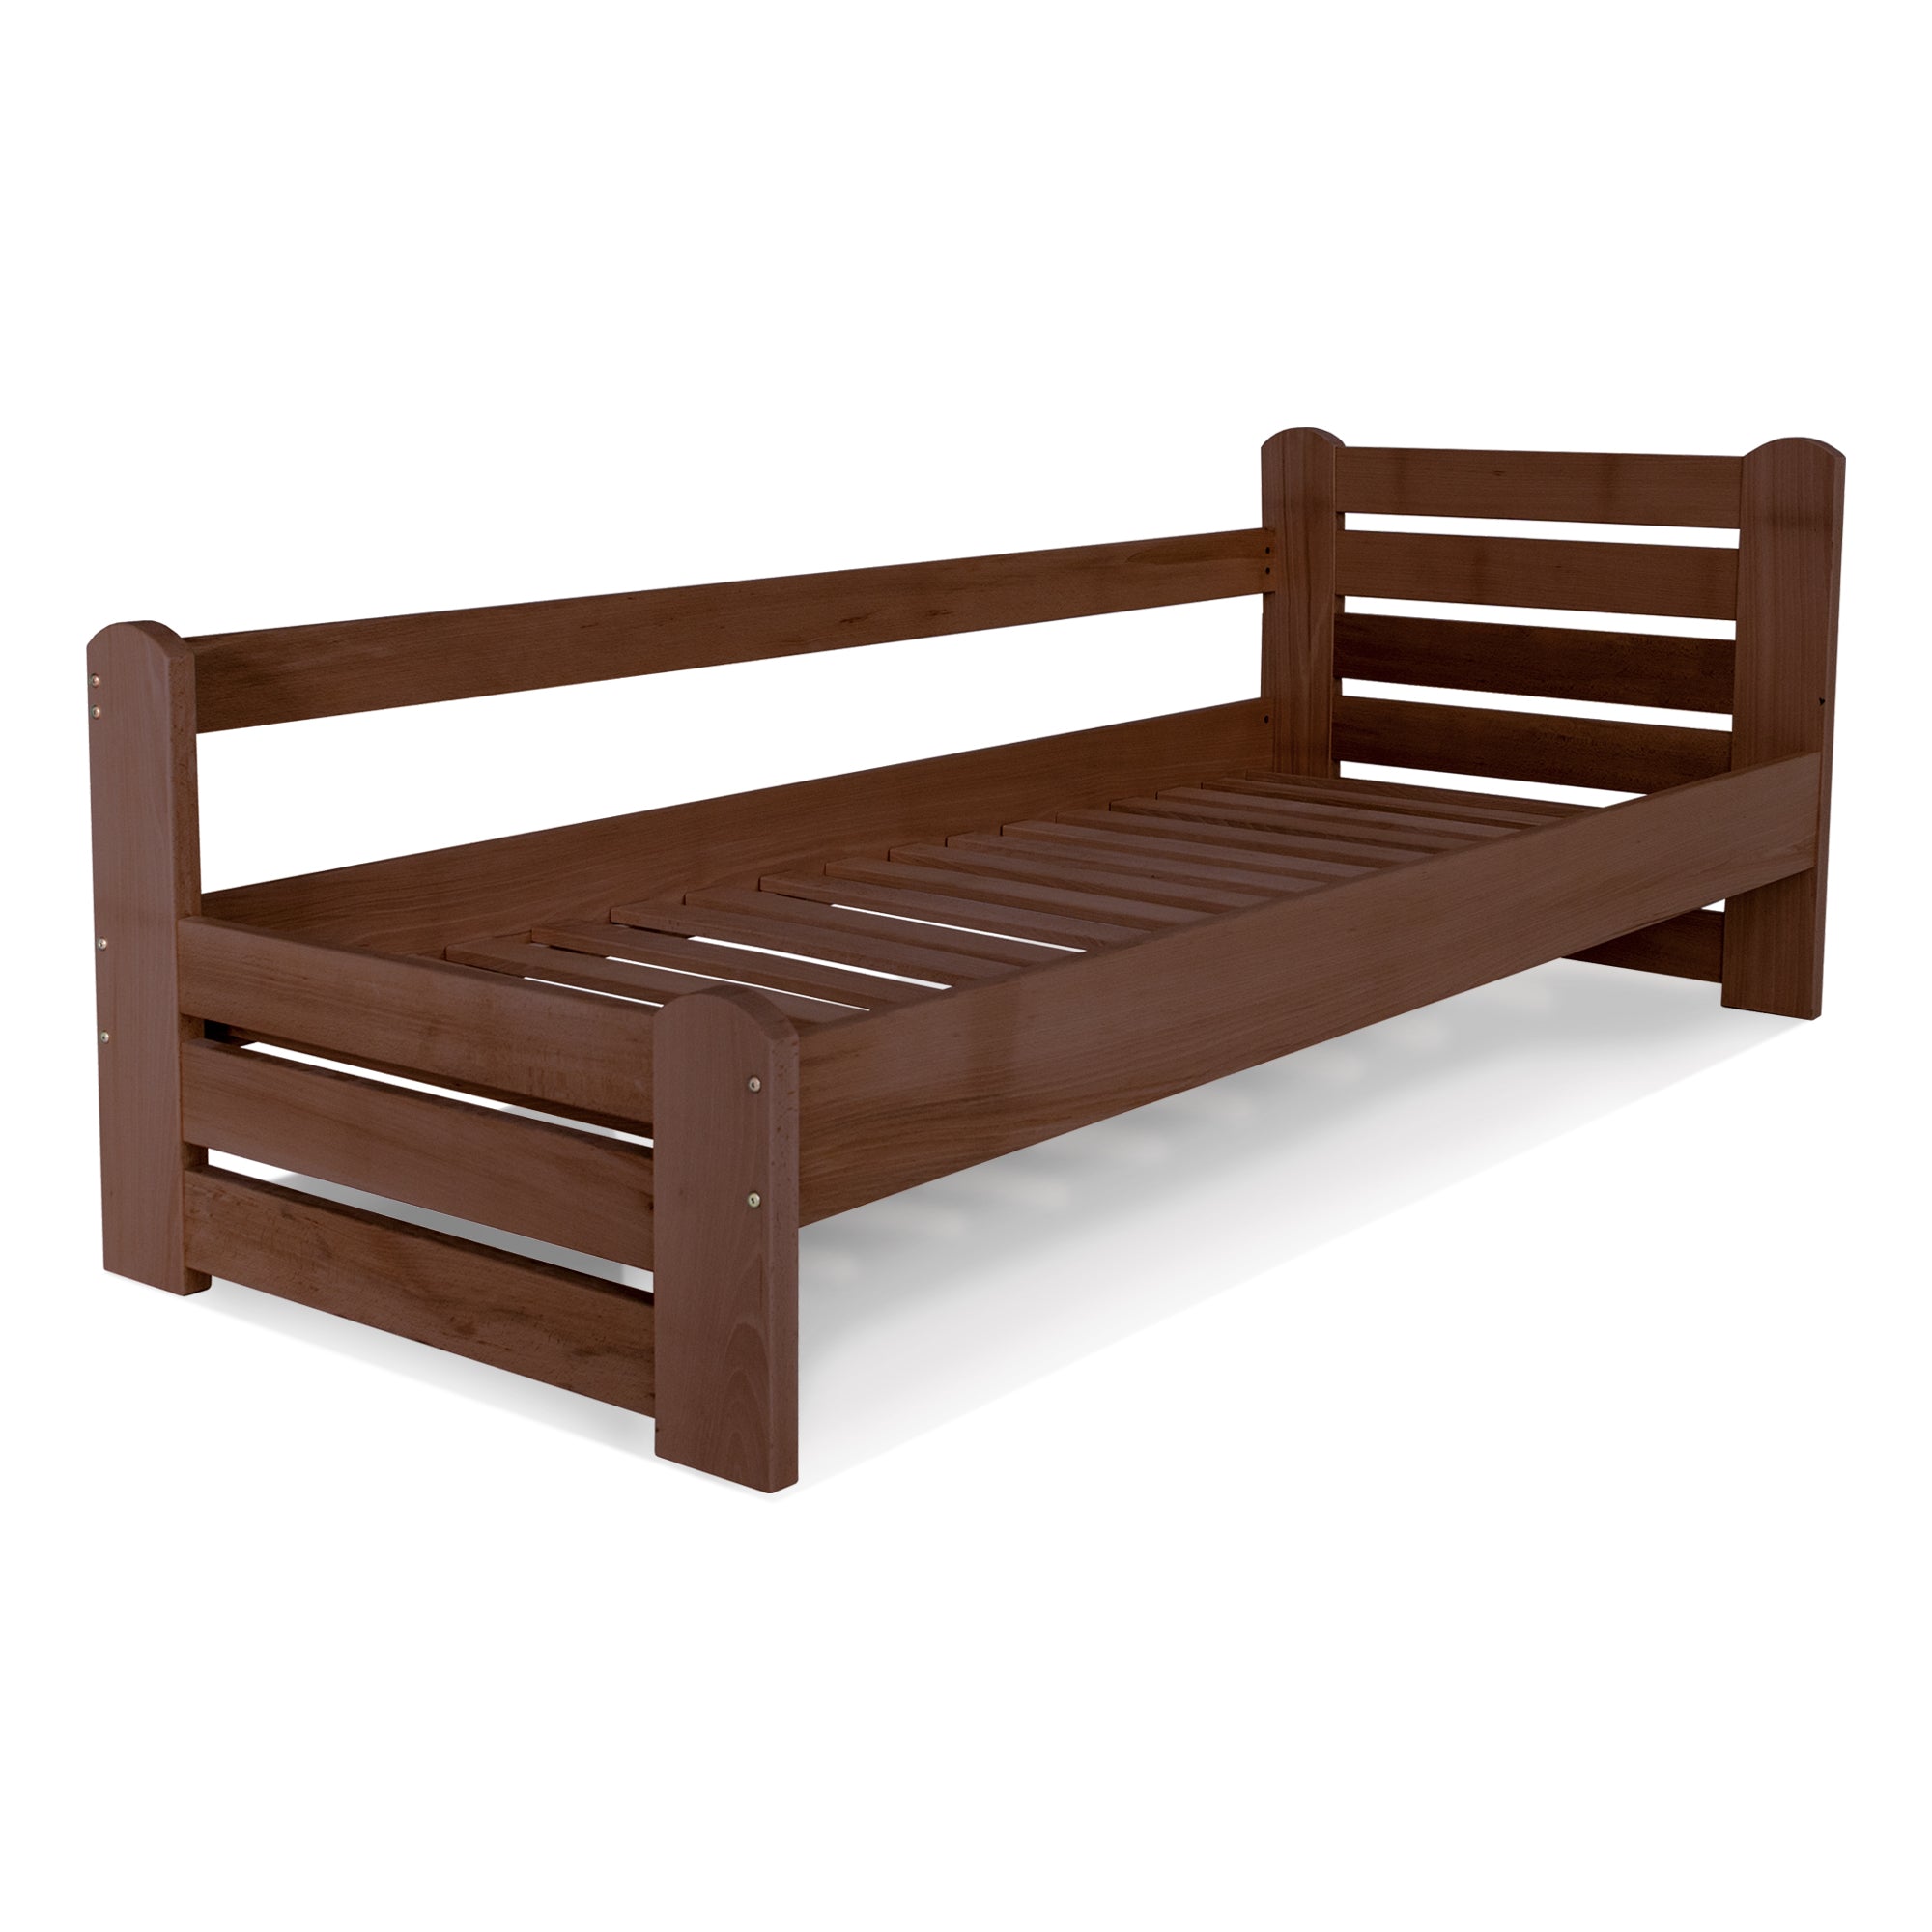 COUNTRY Single Bed with Safety Bar, Beech Wood-walnut frame without mattress